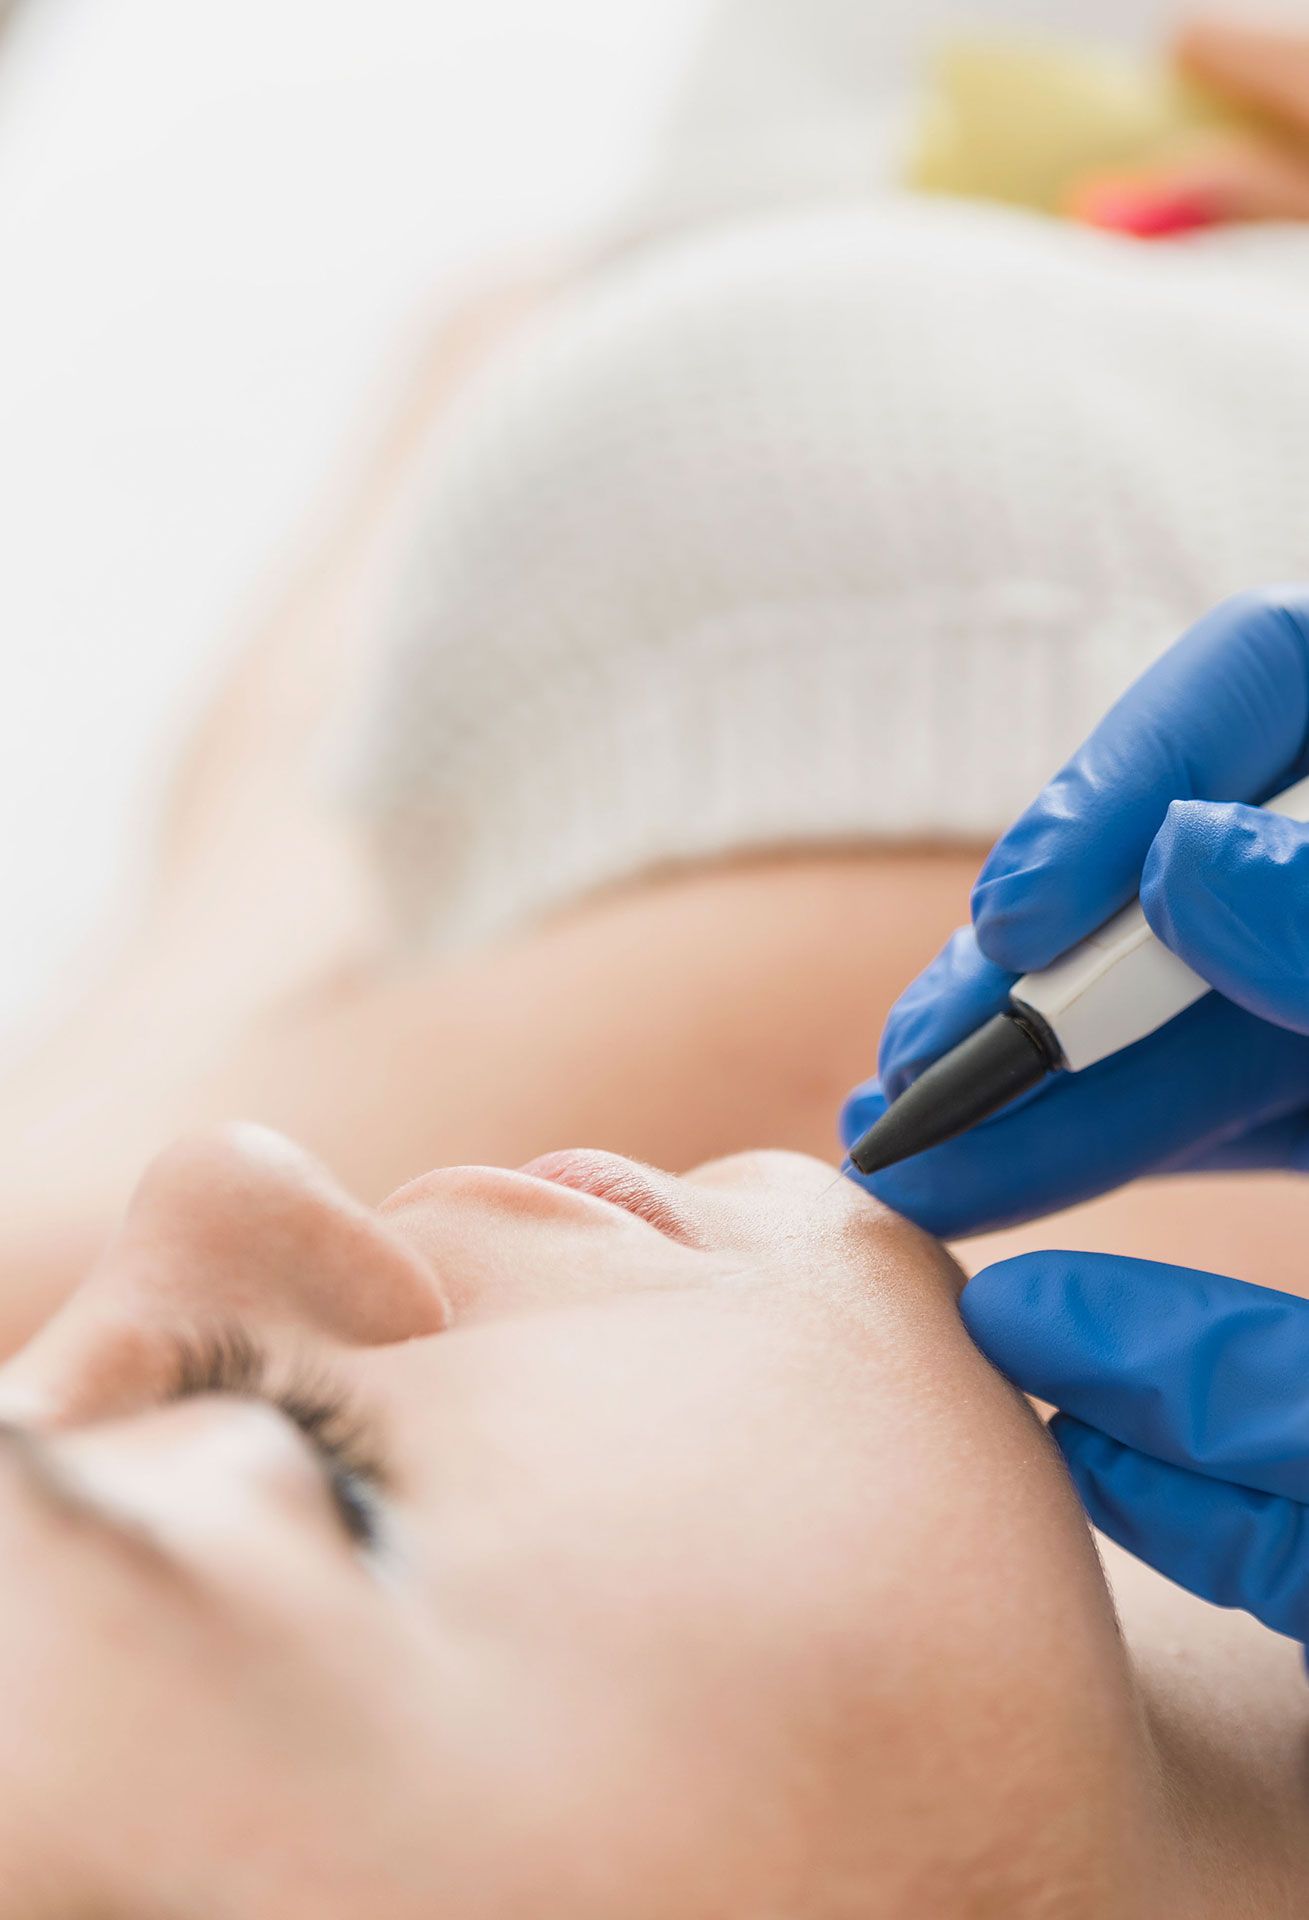 A woman is getting hair removal through needle-based electrolysis